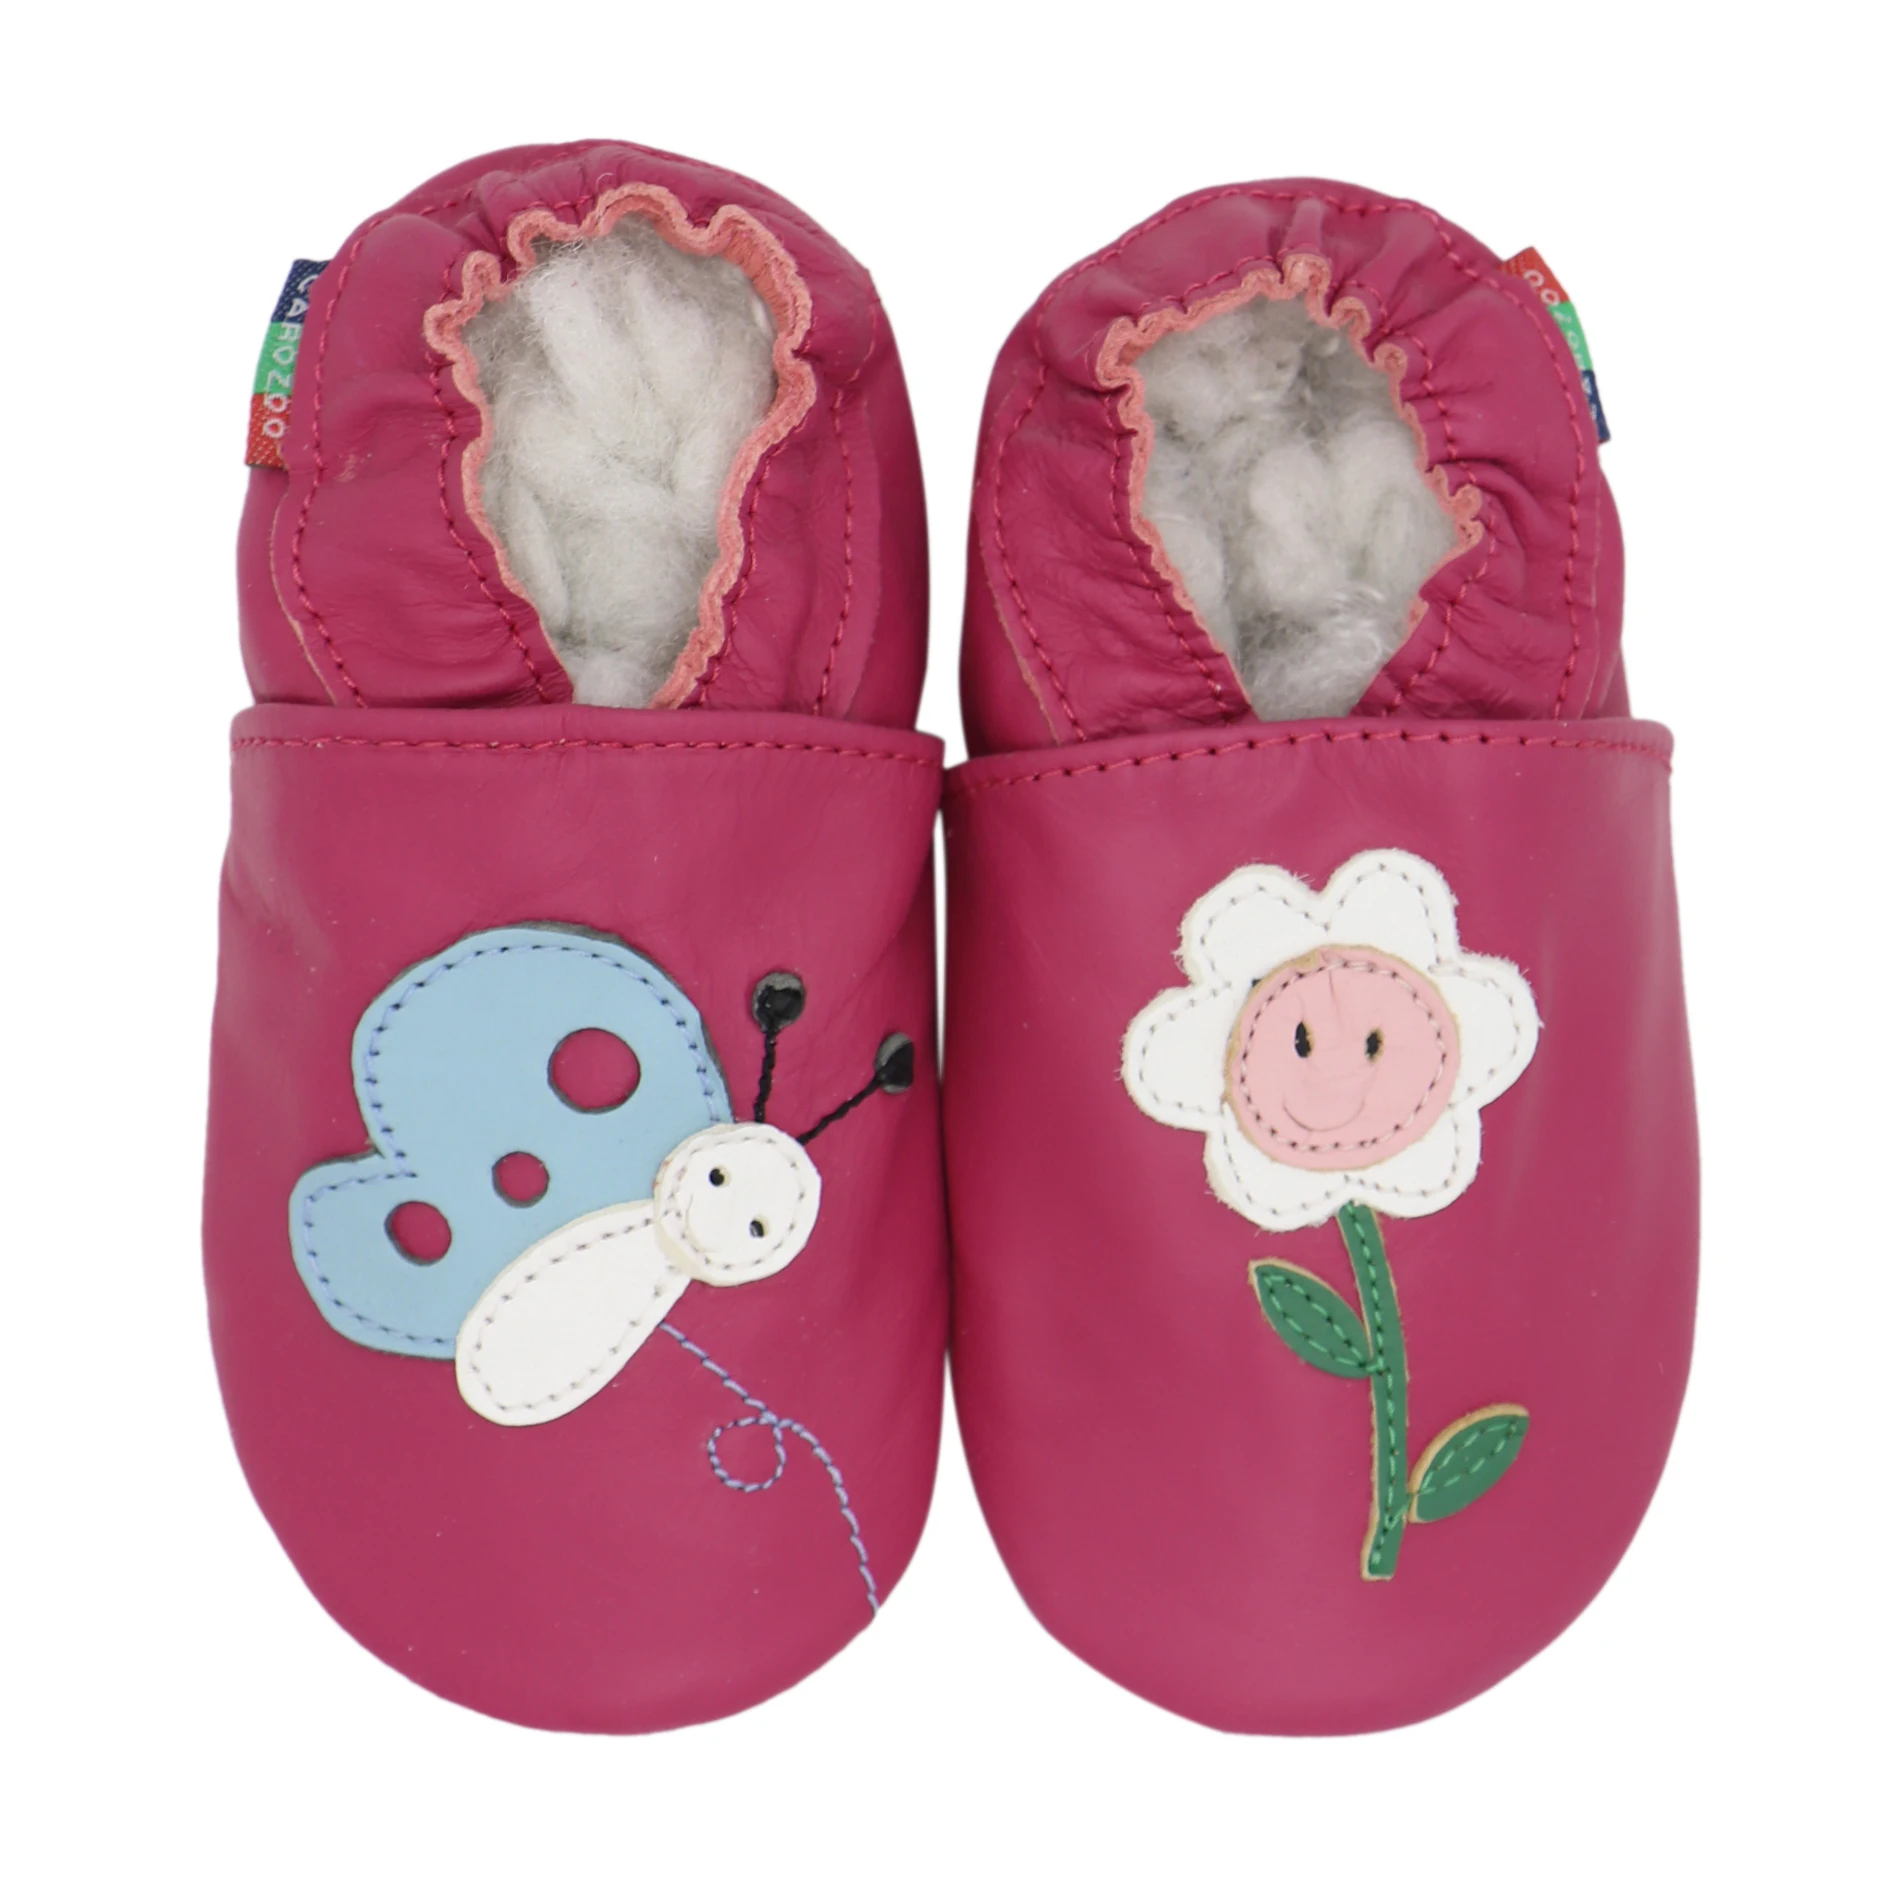 Carozoo New Sheepskin Leather Soft Sole Baby Shoes Toddler Slippers Up To 4 Years First Walker